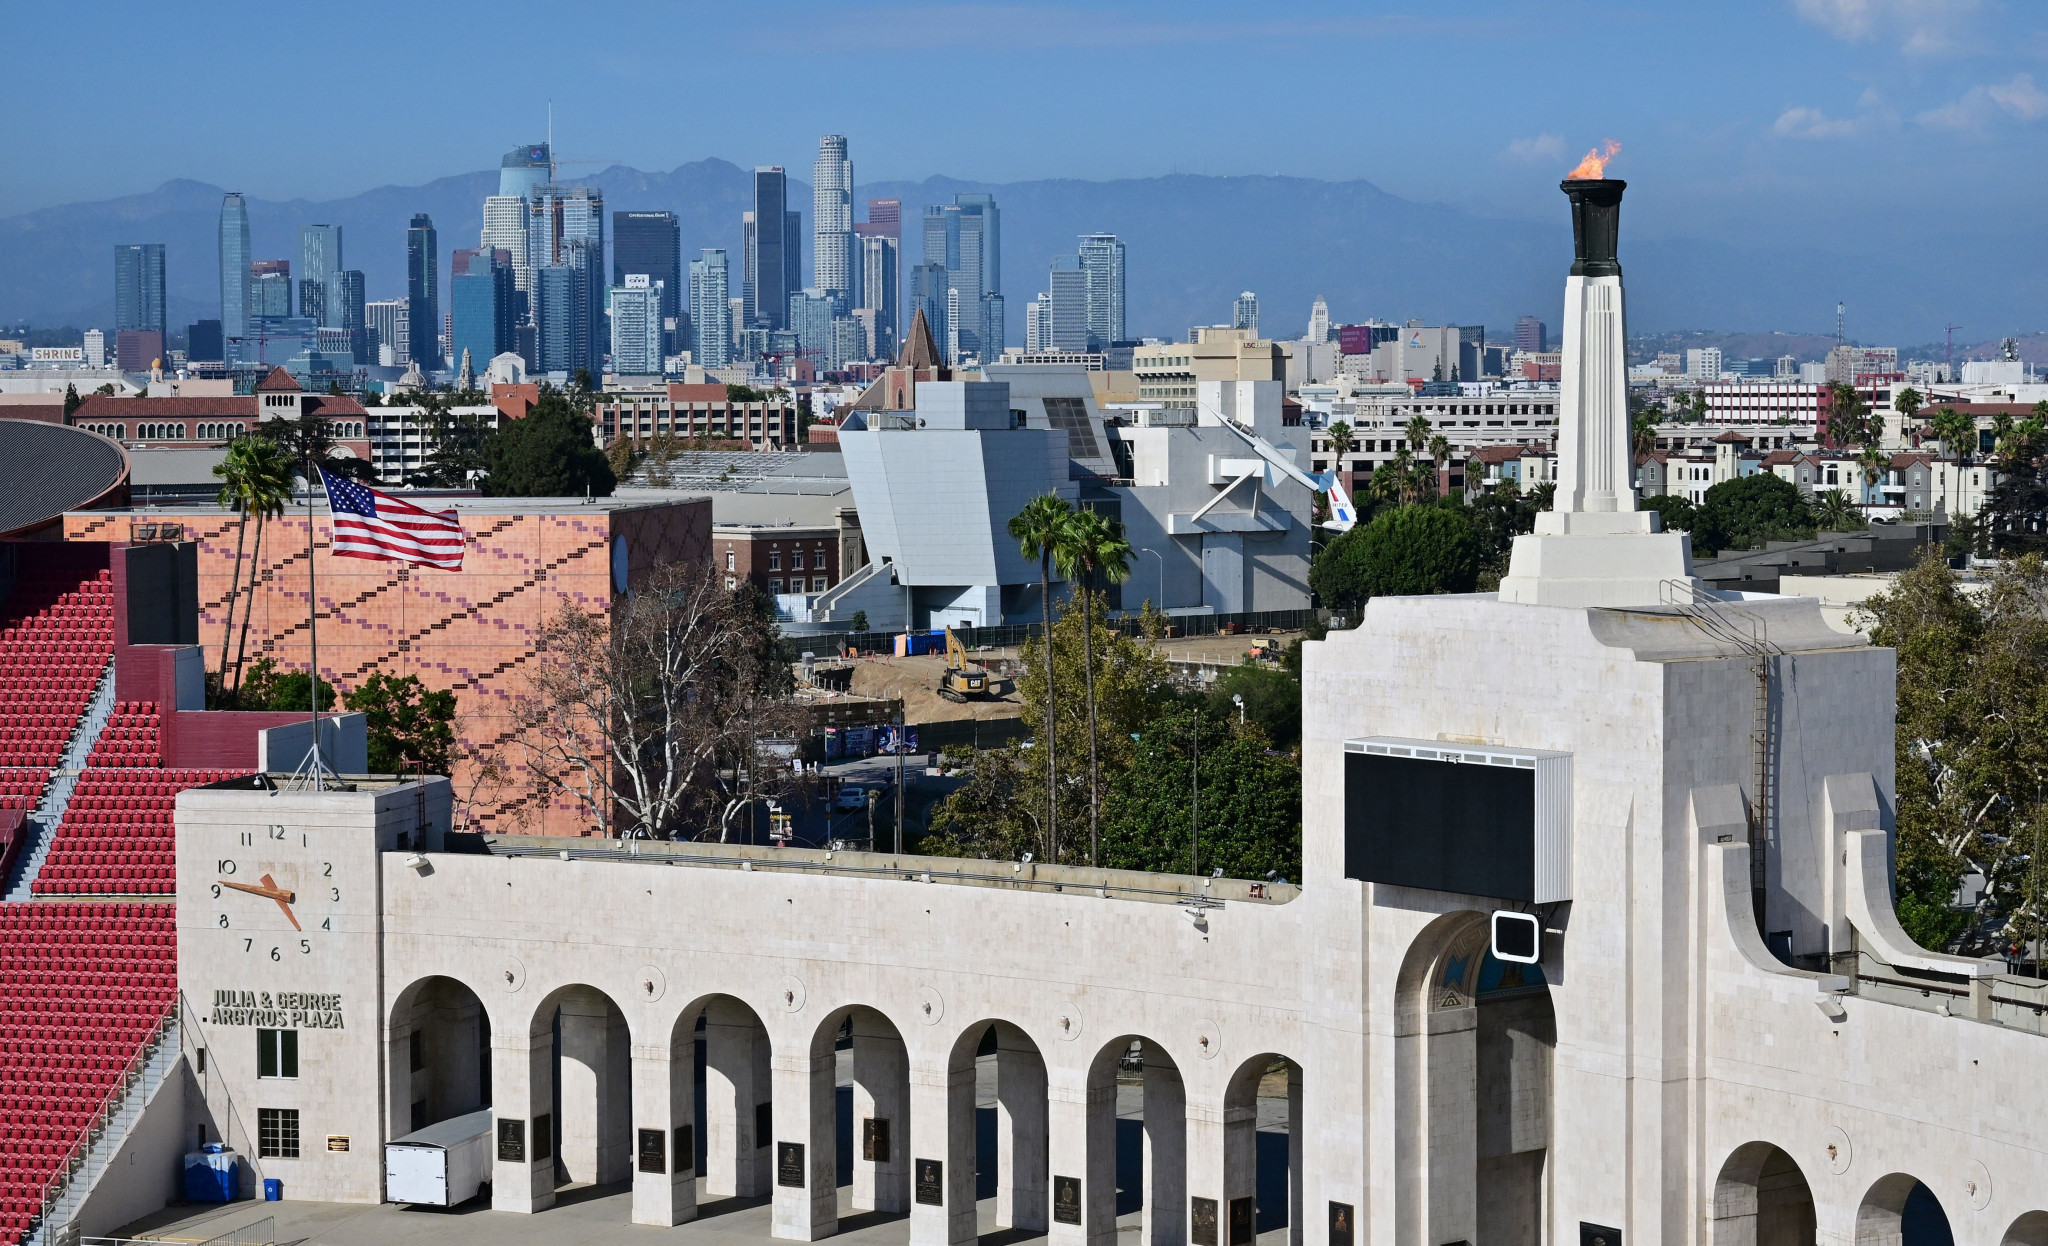 The venue for shooting at Los Angeles 2028 has not been finalised yet ©Getty Images